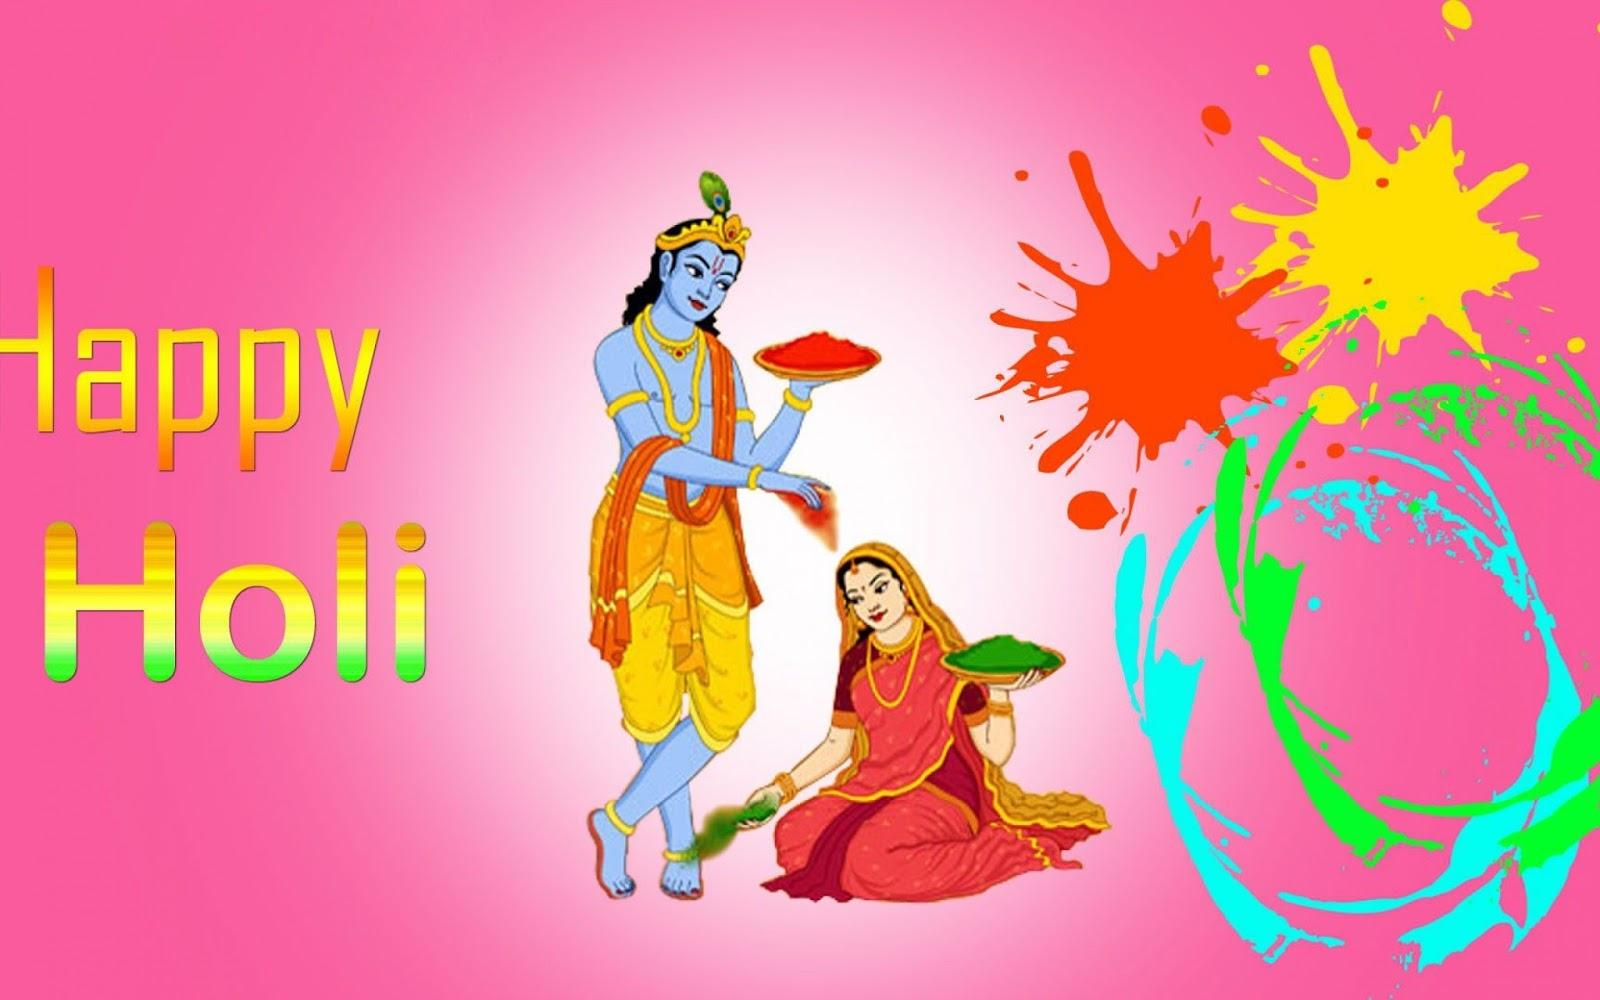 Get Free Romantic Happy Holi Image 2018 For Lover